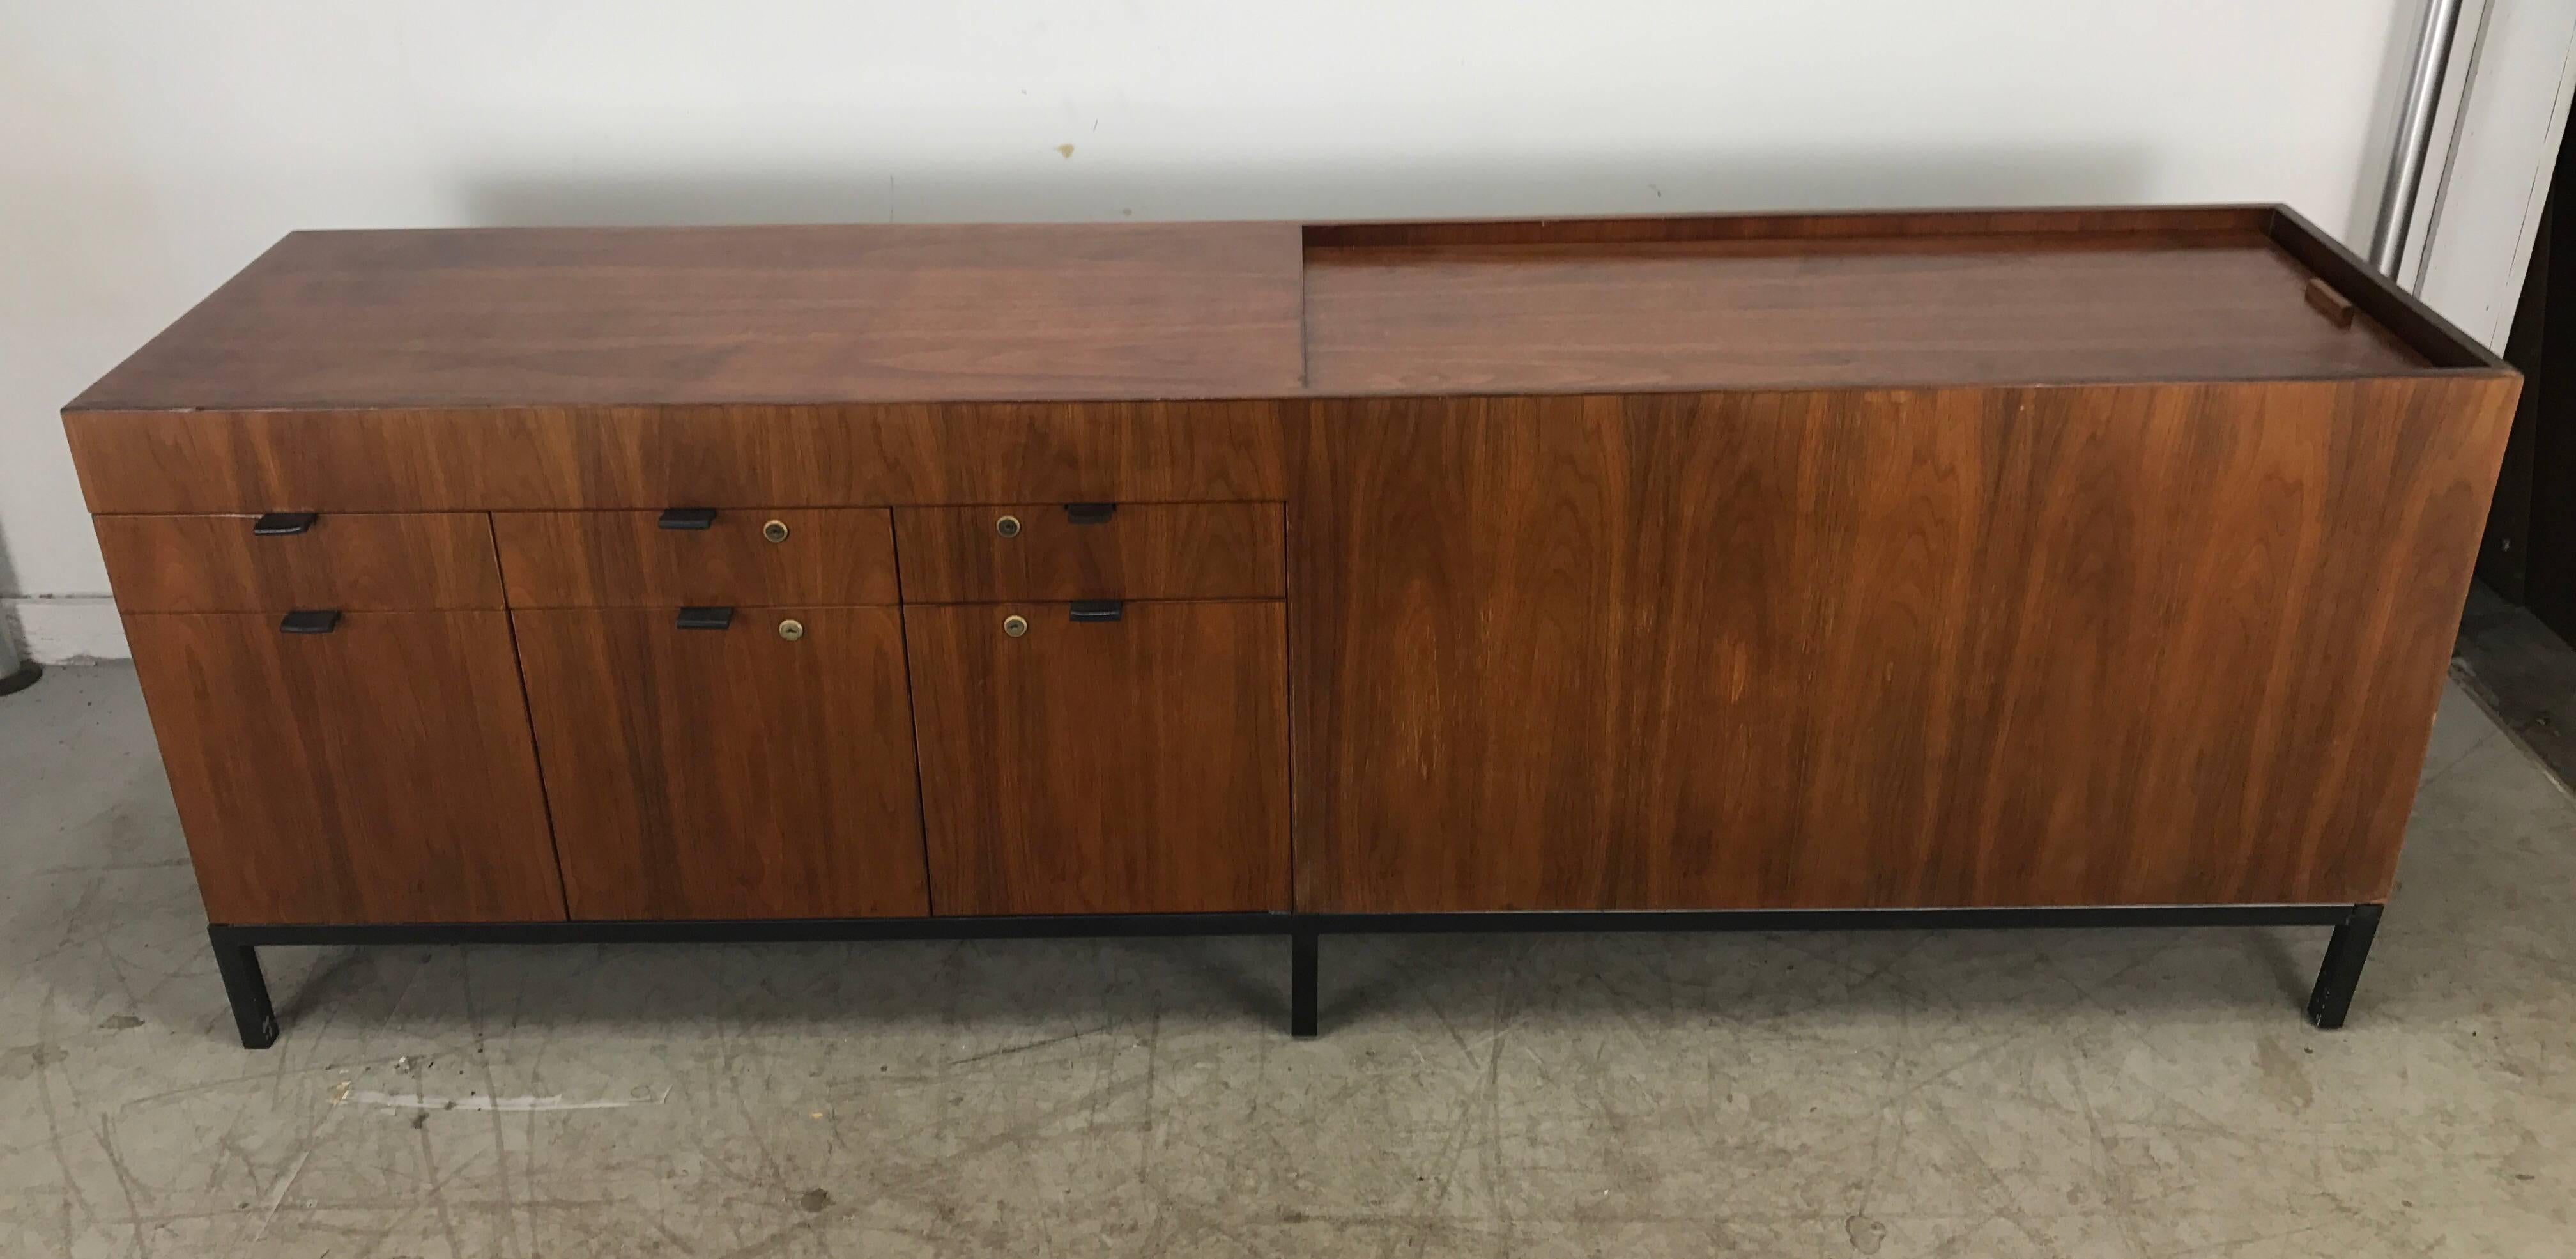 Wonderful walnut credenza or sideboard file manufactured by Stow and Davis in the manner or Florence Knoll handsome bookmatched rich grained walnut with stunning finished back featuring three drawers topping three file drawers and most unusual